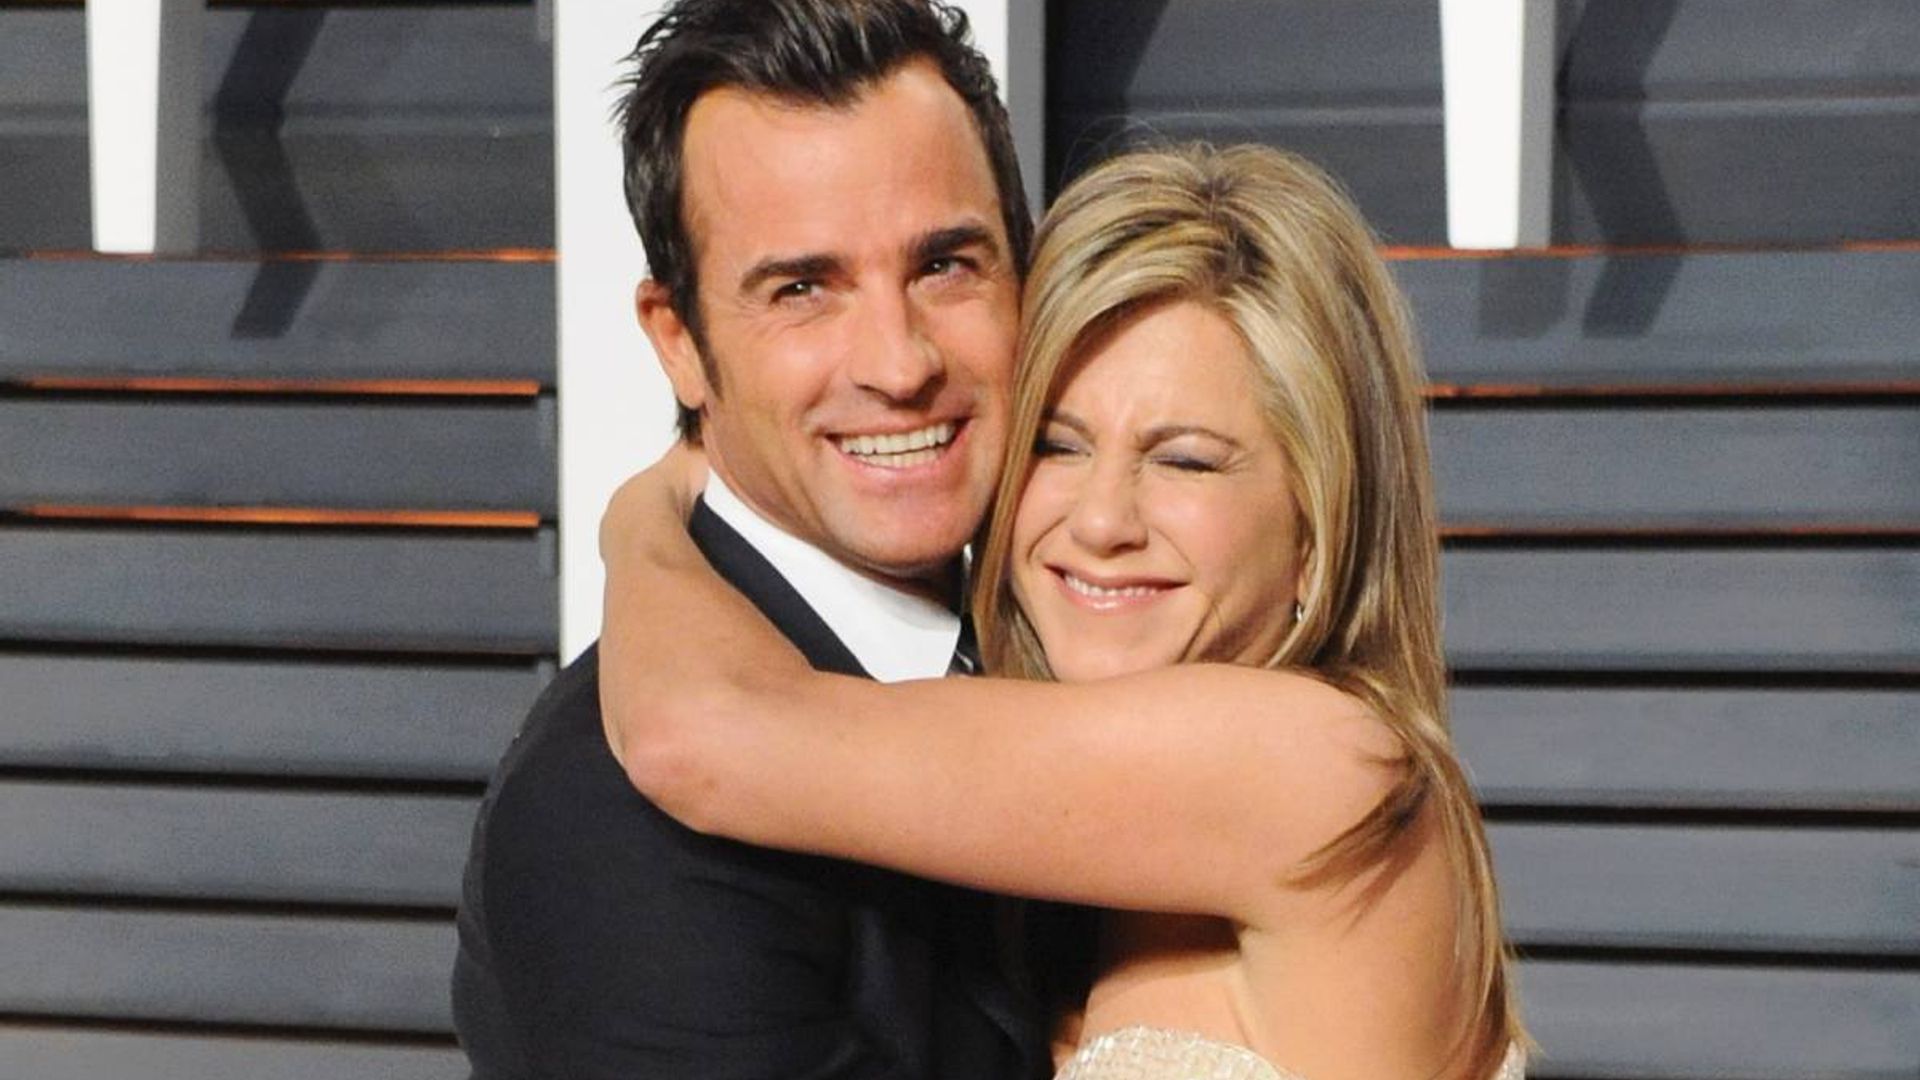 Jennifer Aniston's ex Justin Theroux sweetly shows support for her at Emmy Awards